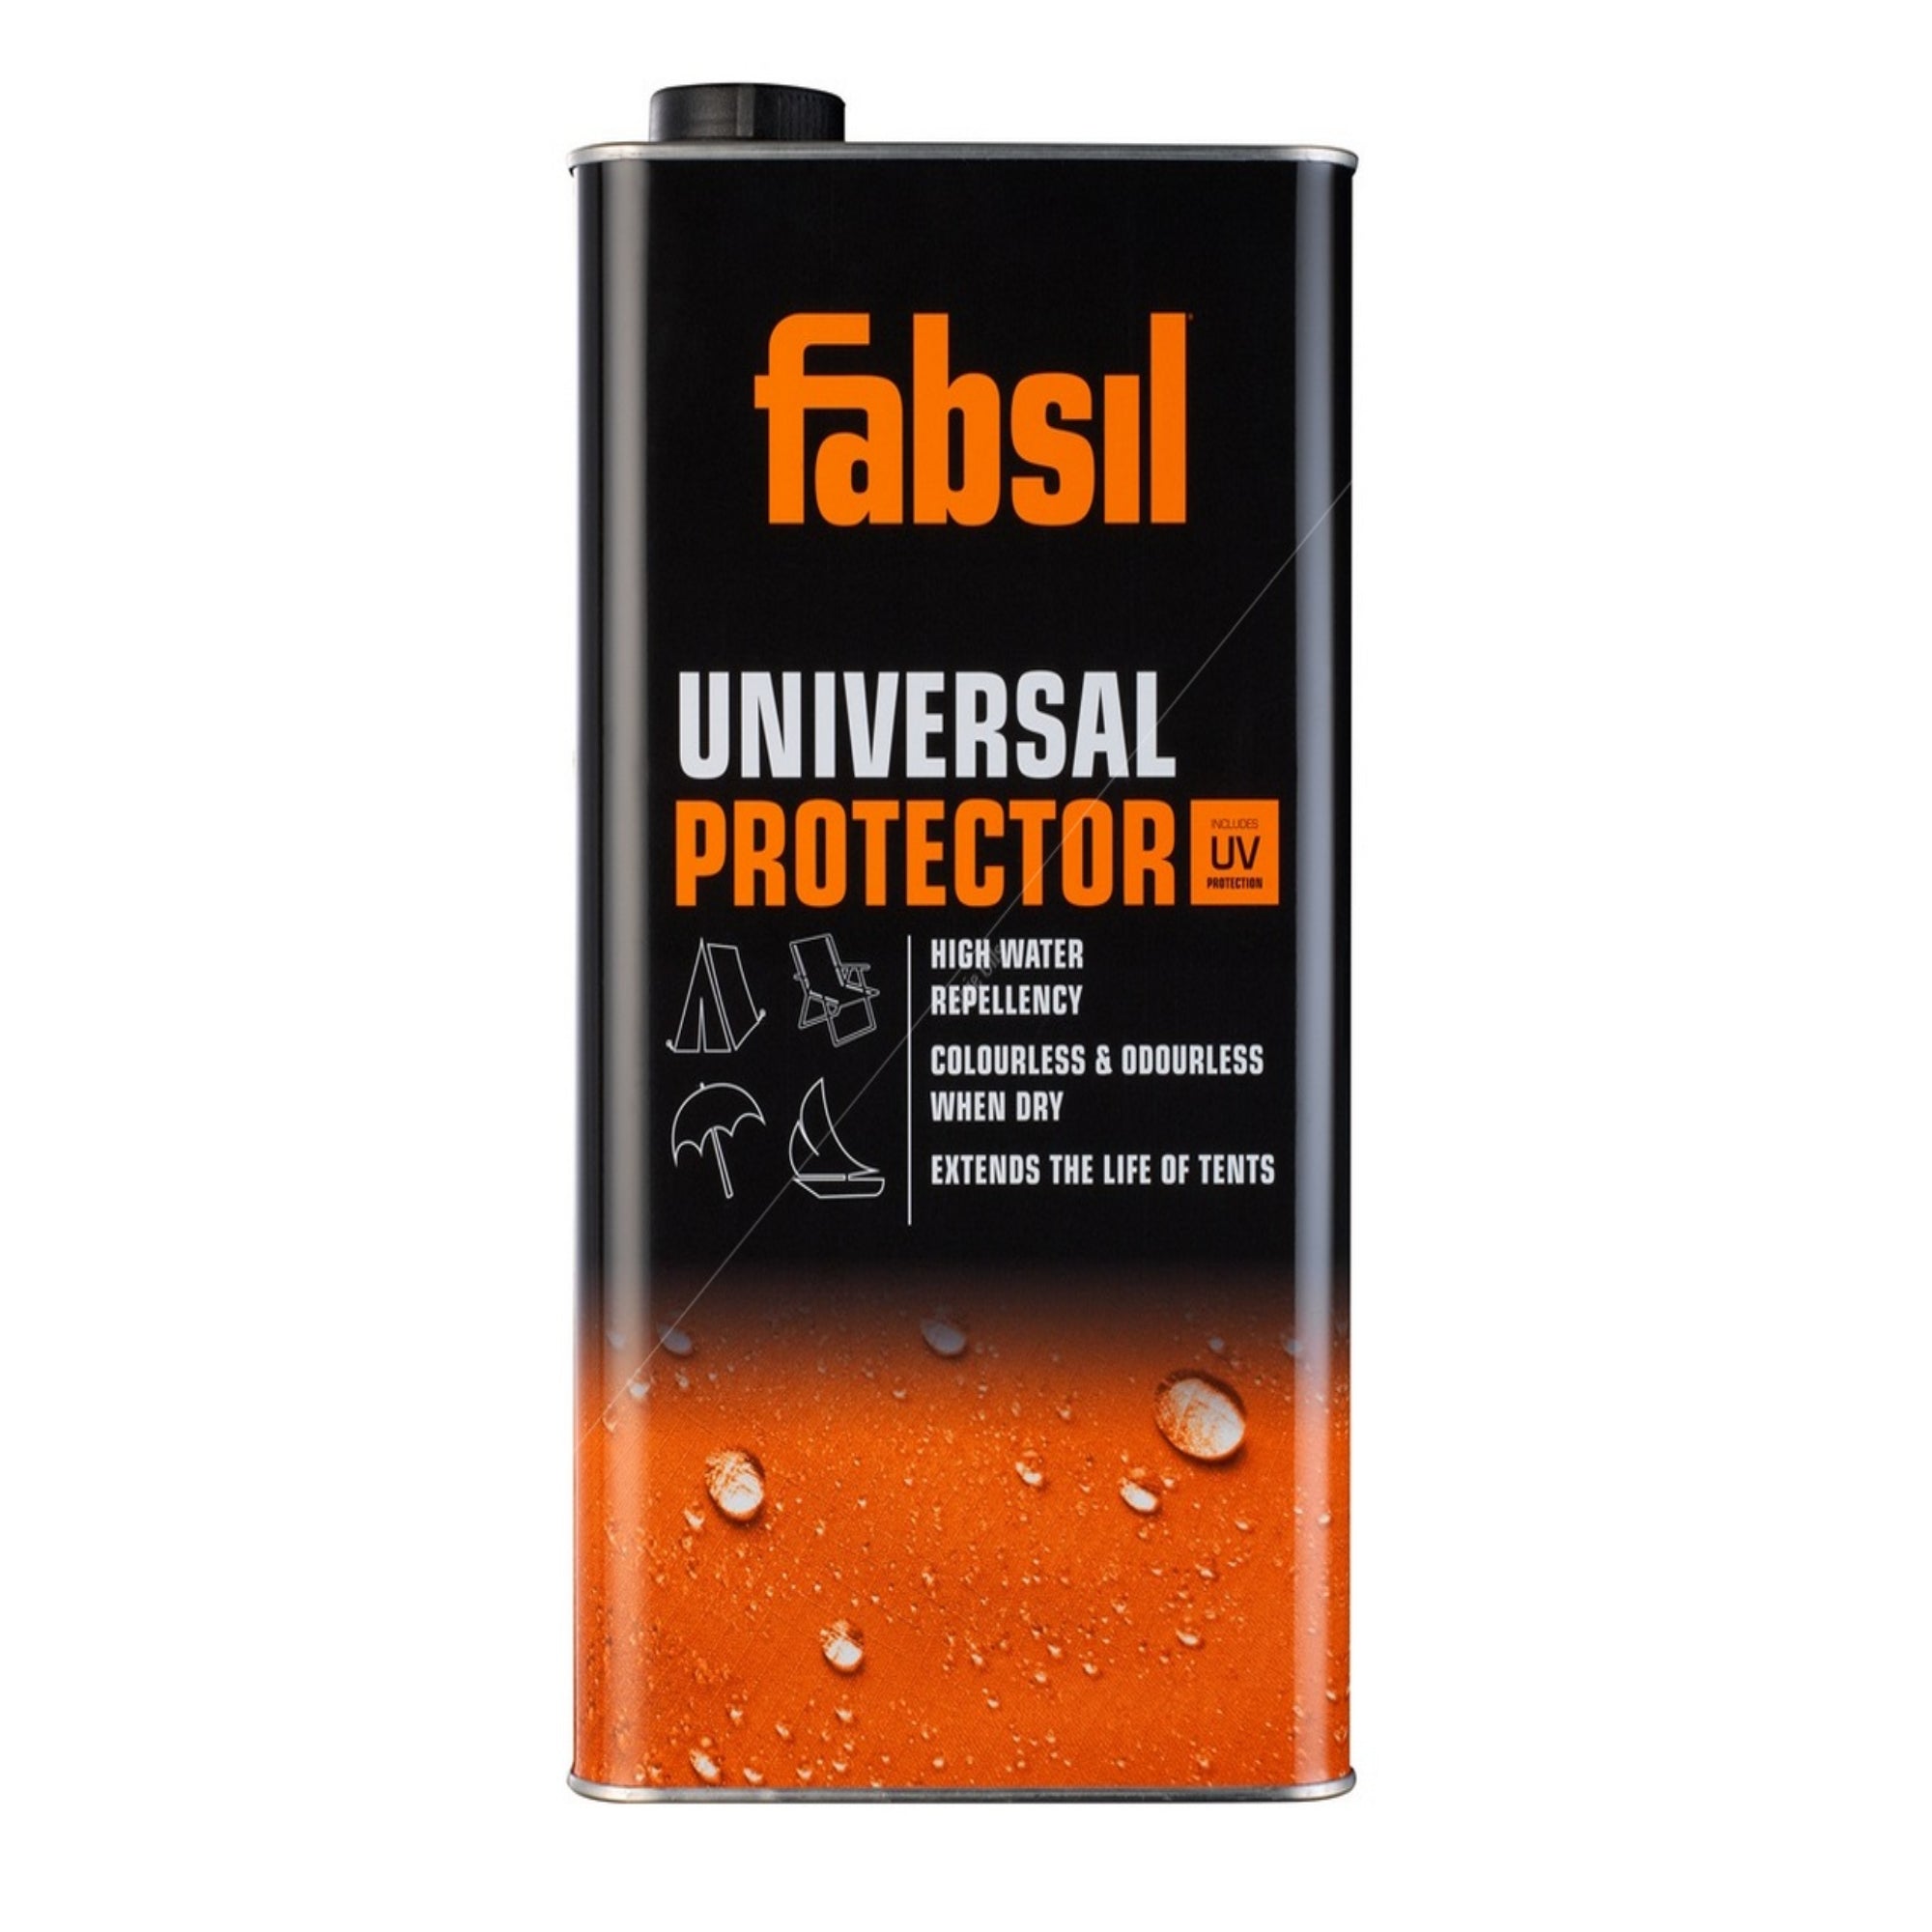 Fabsil Universal Protector 5 Litres